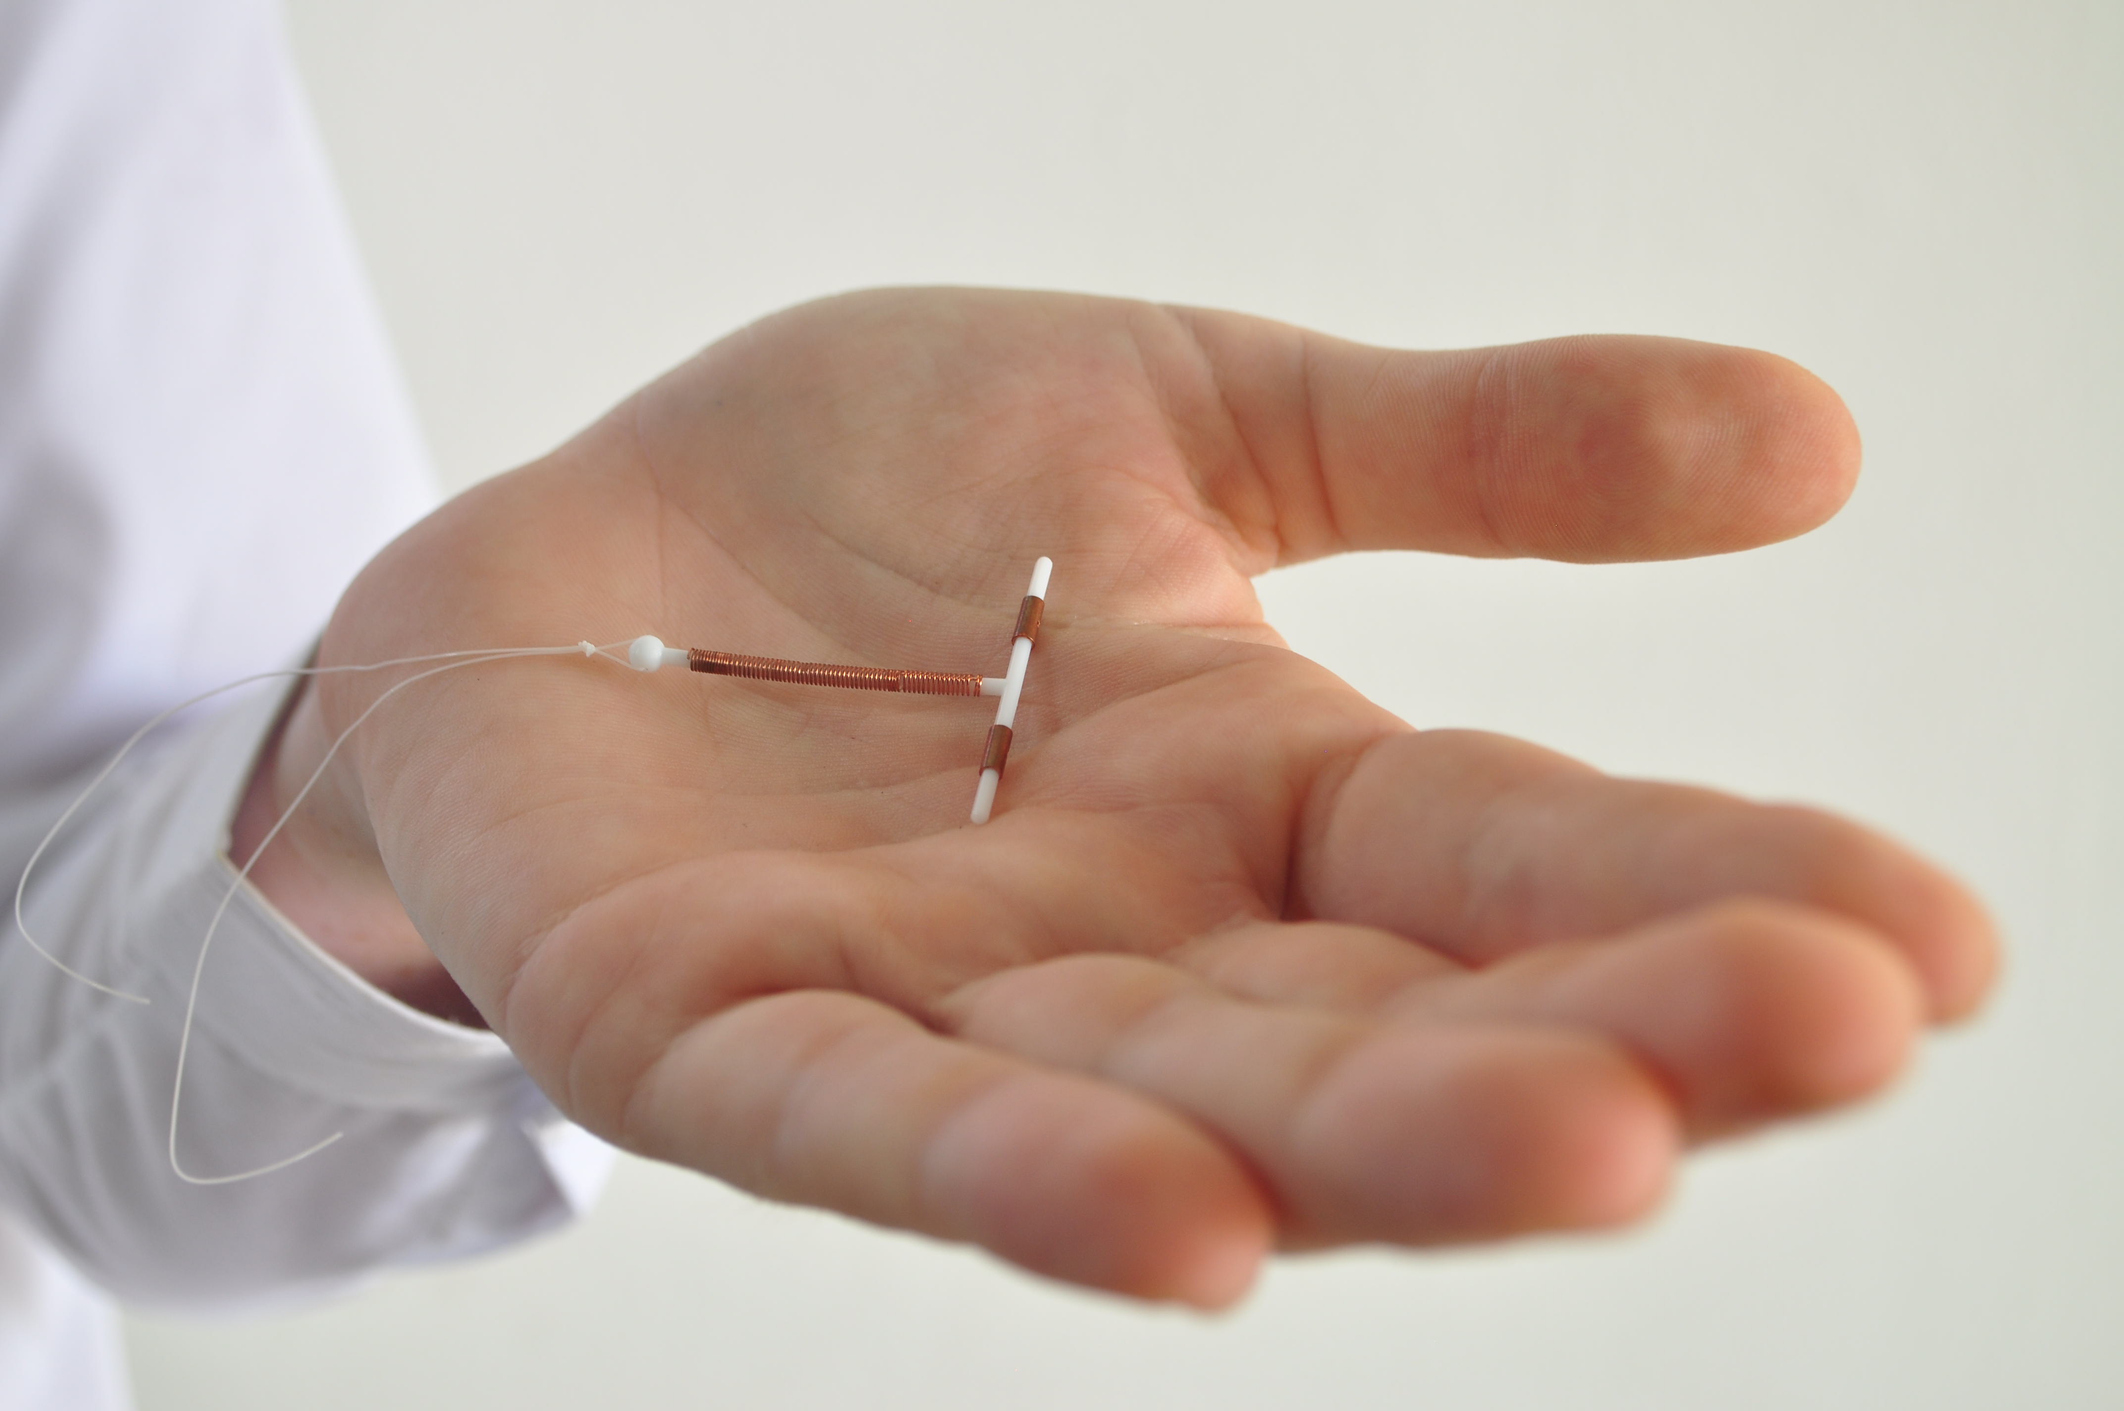 Doctor holds an IUD as she explains whether or not an IUD can cause infertility.